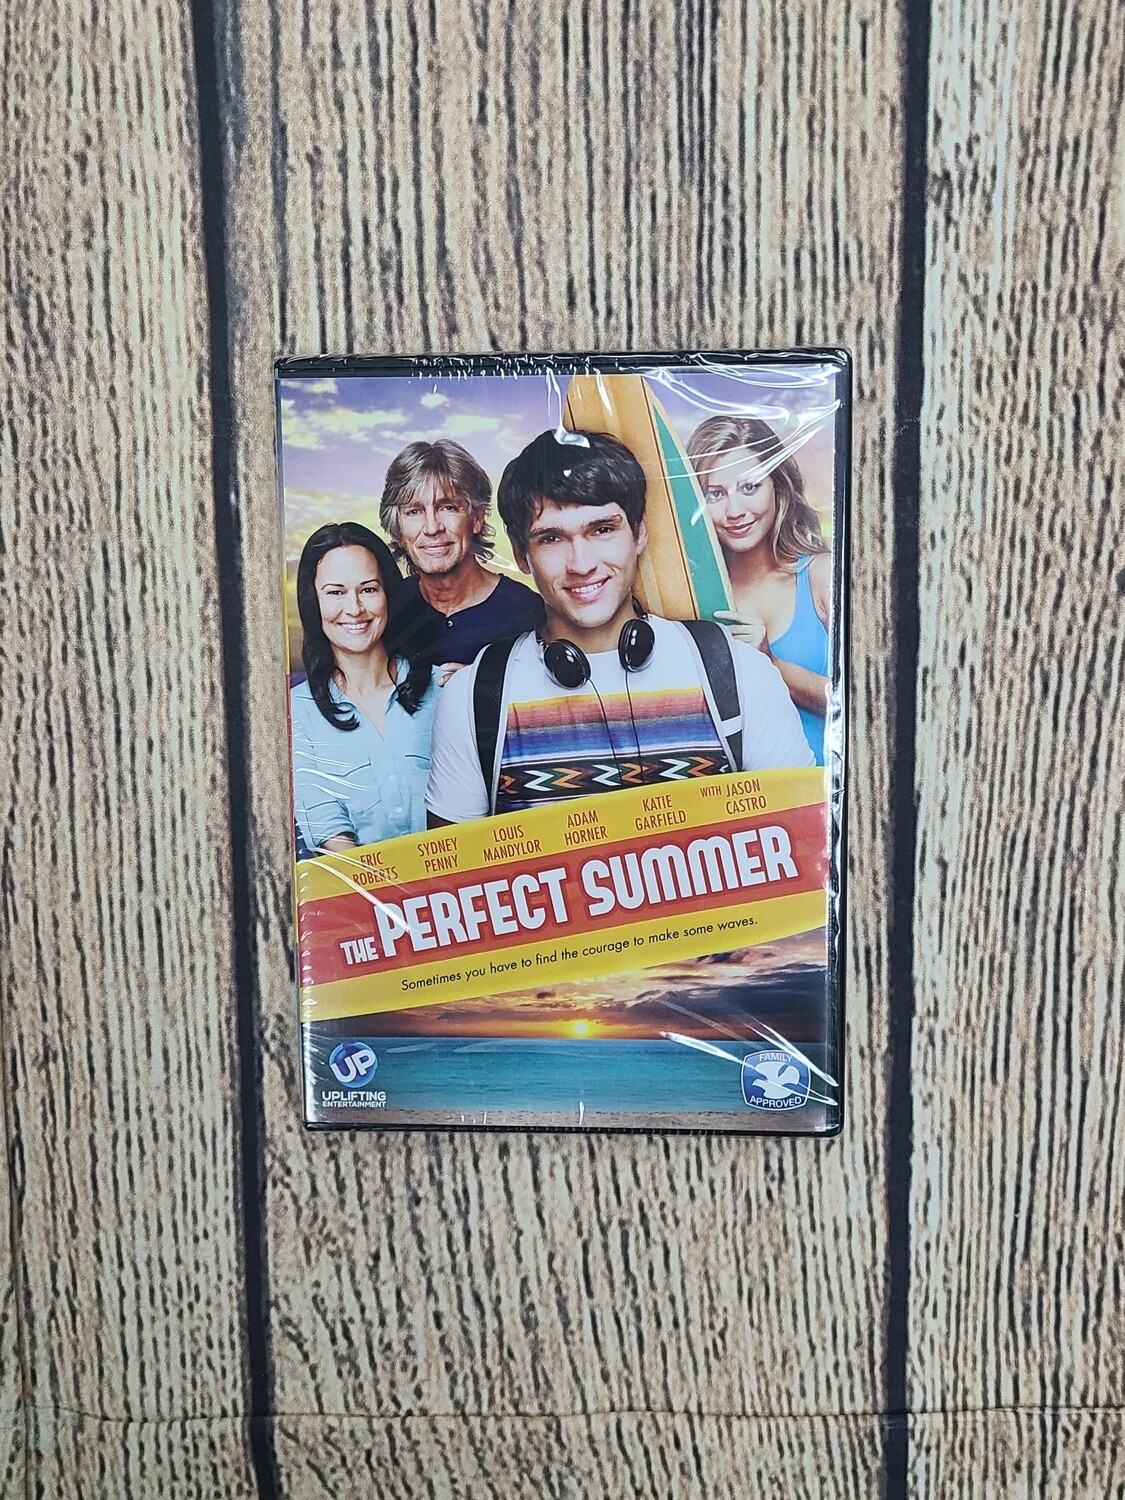 The Perfect Summer DVD